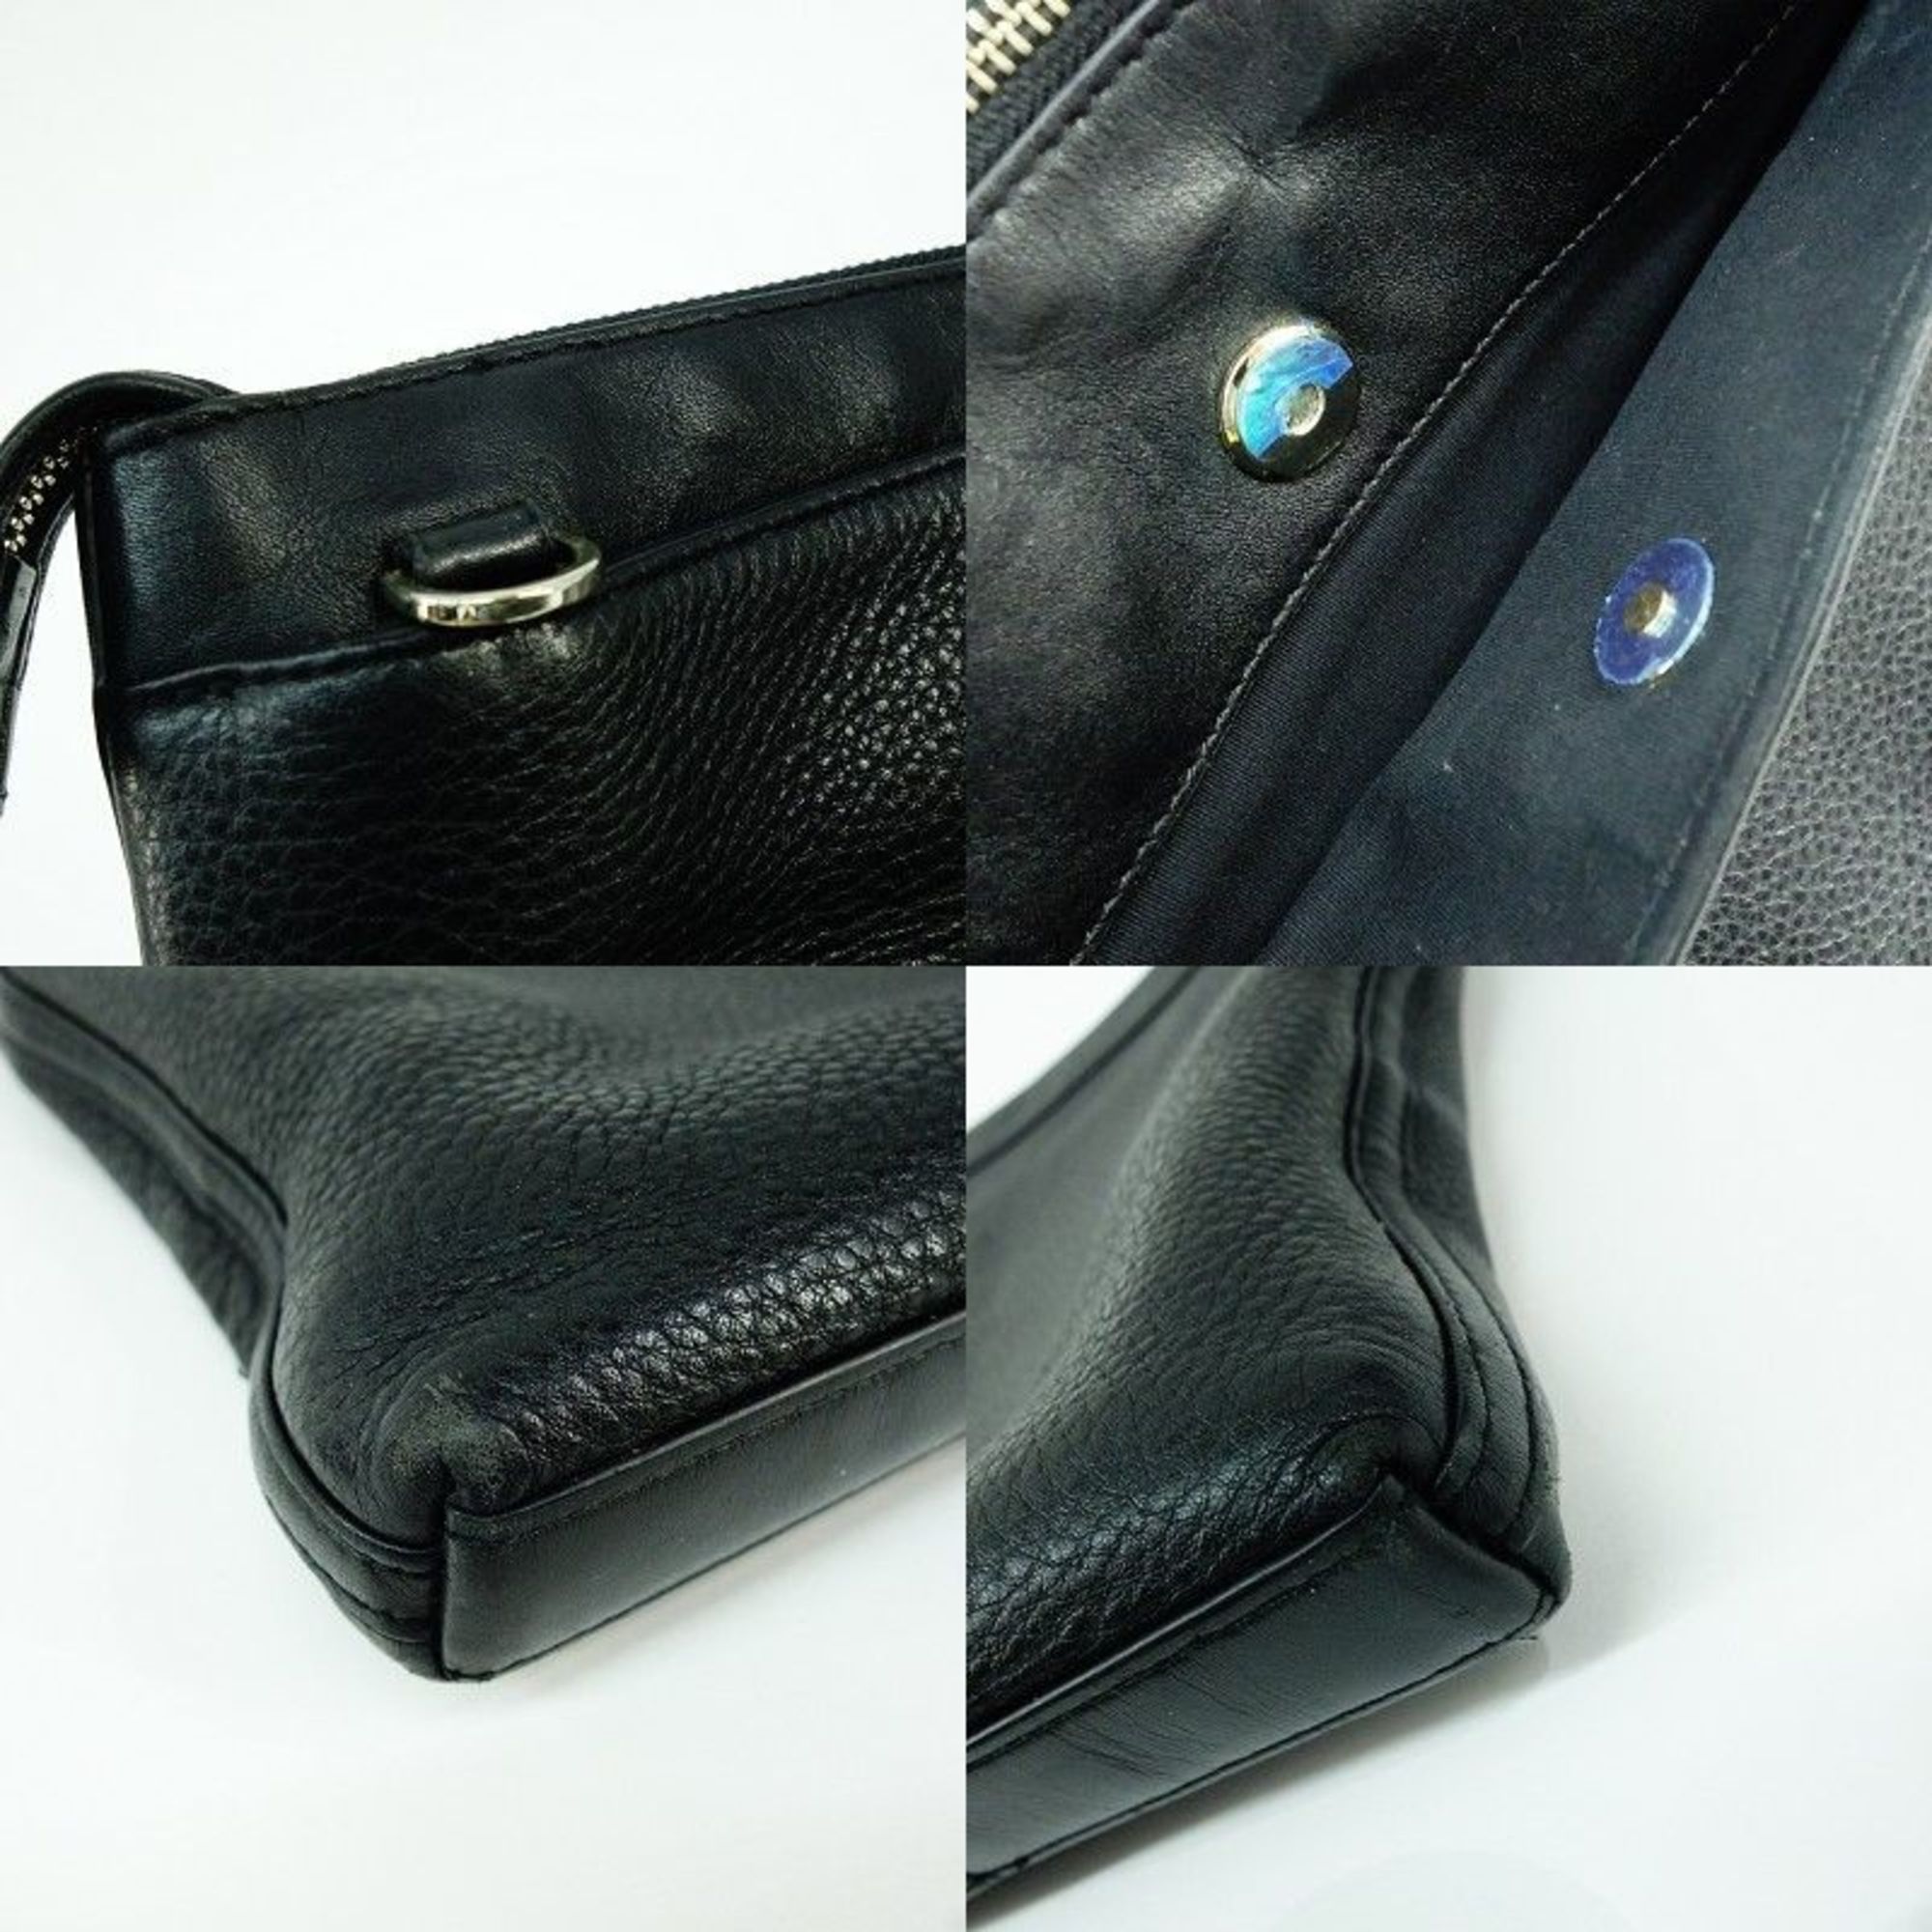 Paul Smith City Travel Leather Clutch Bag in Black